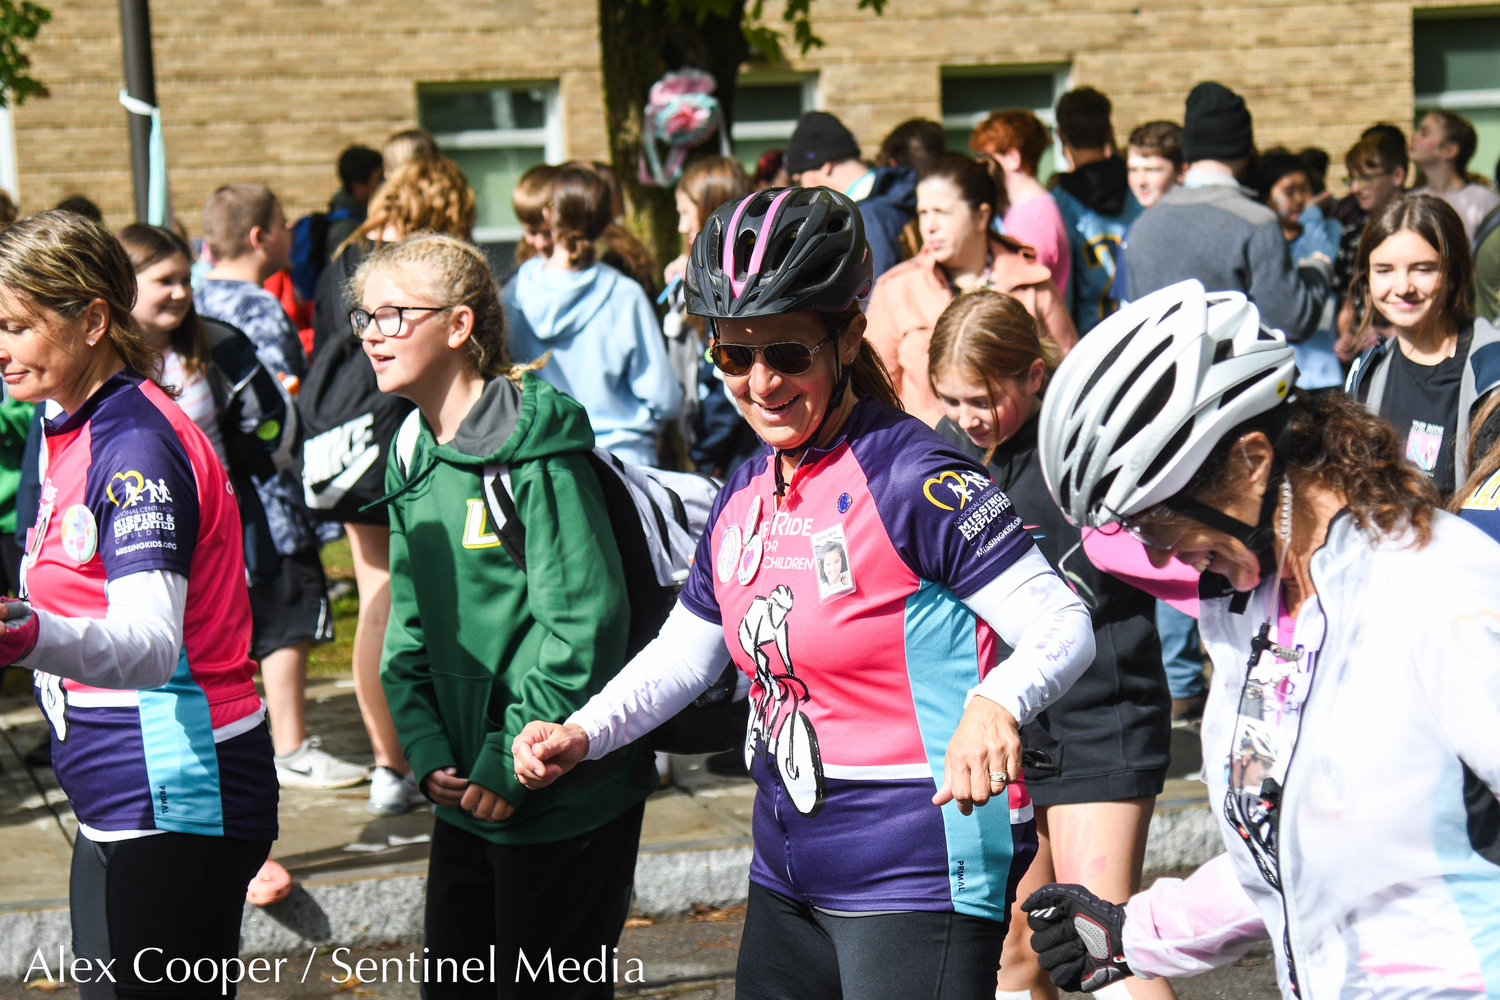 Riders take a break from the course and dance with students during the 24th annual Ride For Missing Children on Wednesday, Sept. 28 outside of Gregory B. Jarvis Middle School in Mohawk.